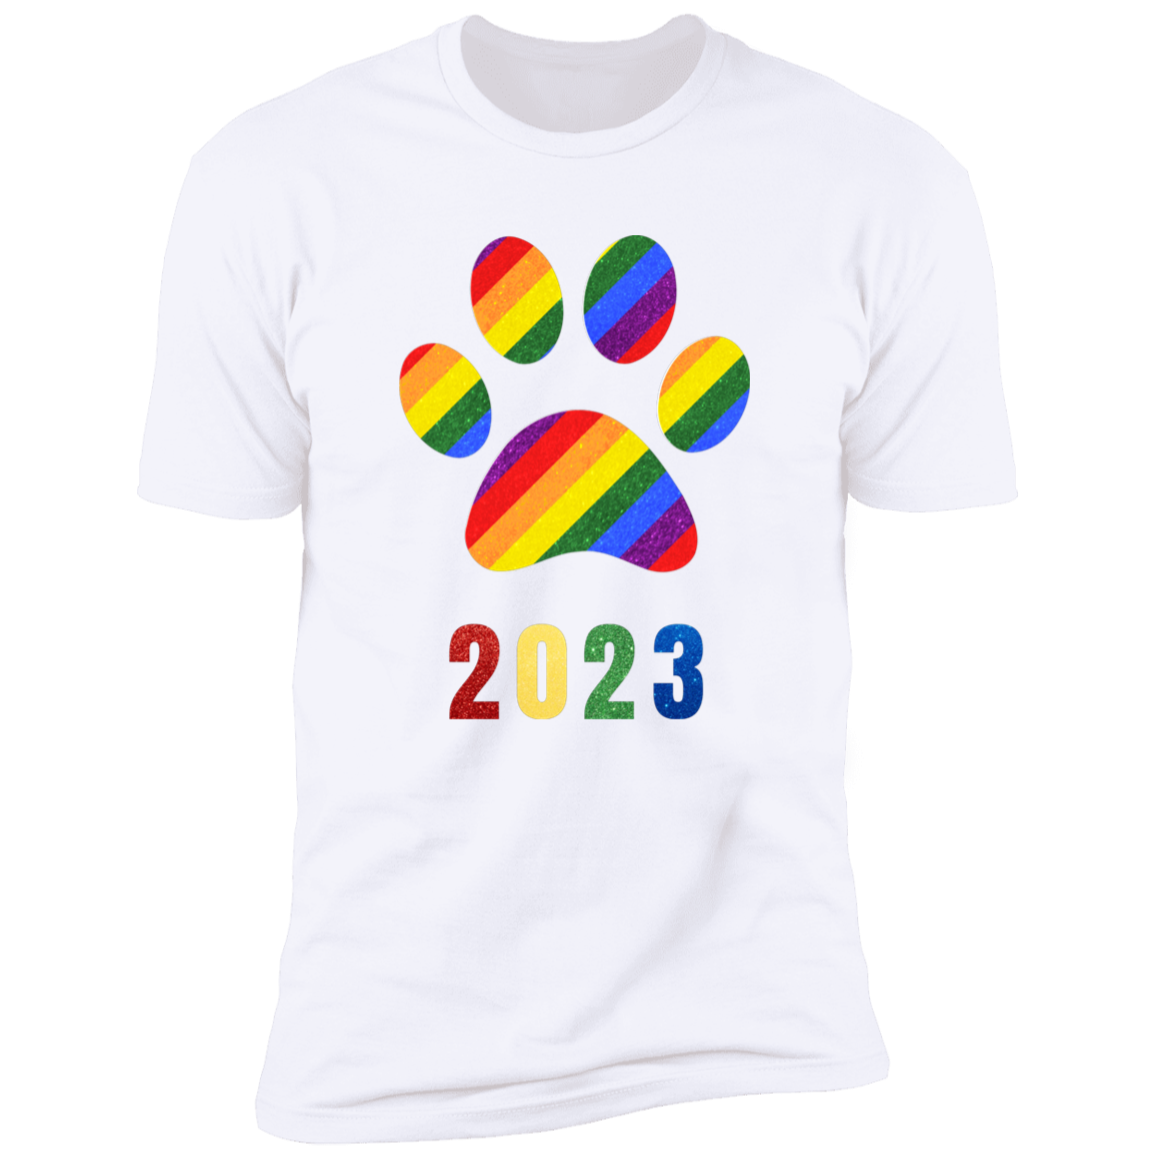 Pride Paw 2023 (Sparkles) Pride T-shirt, Paw Pride Dog Shirt for humans, in white